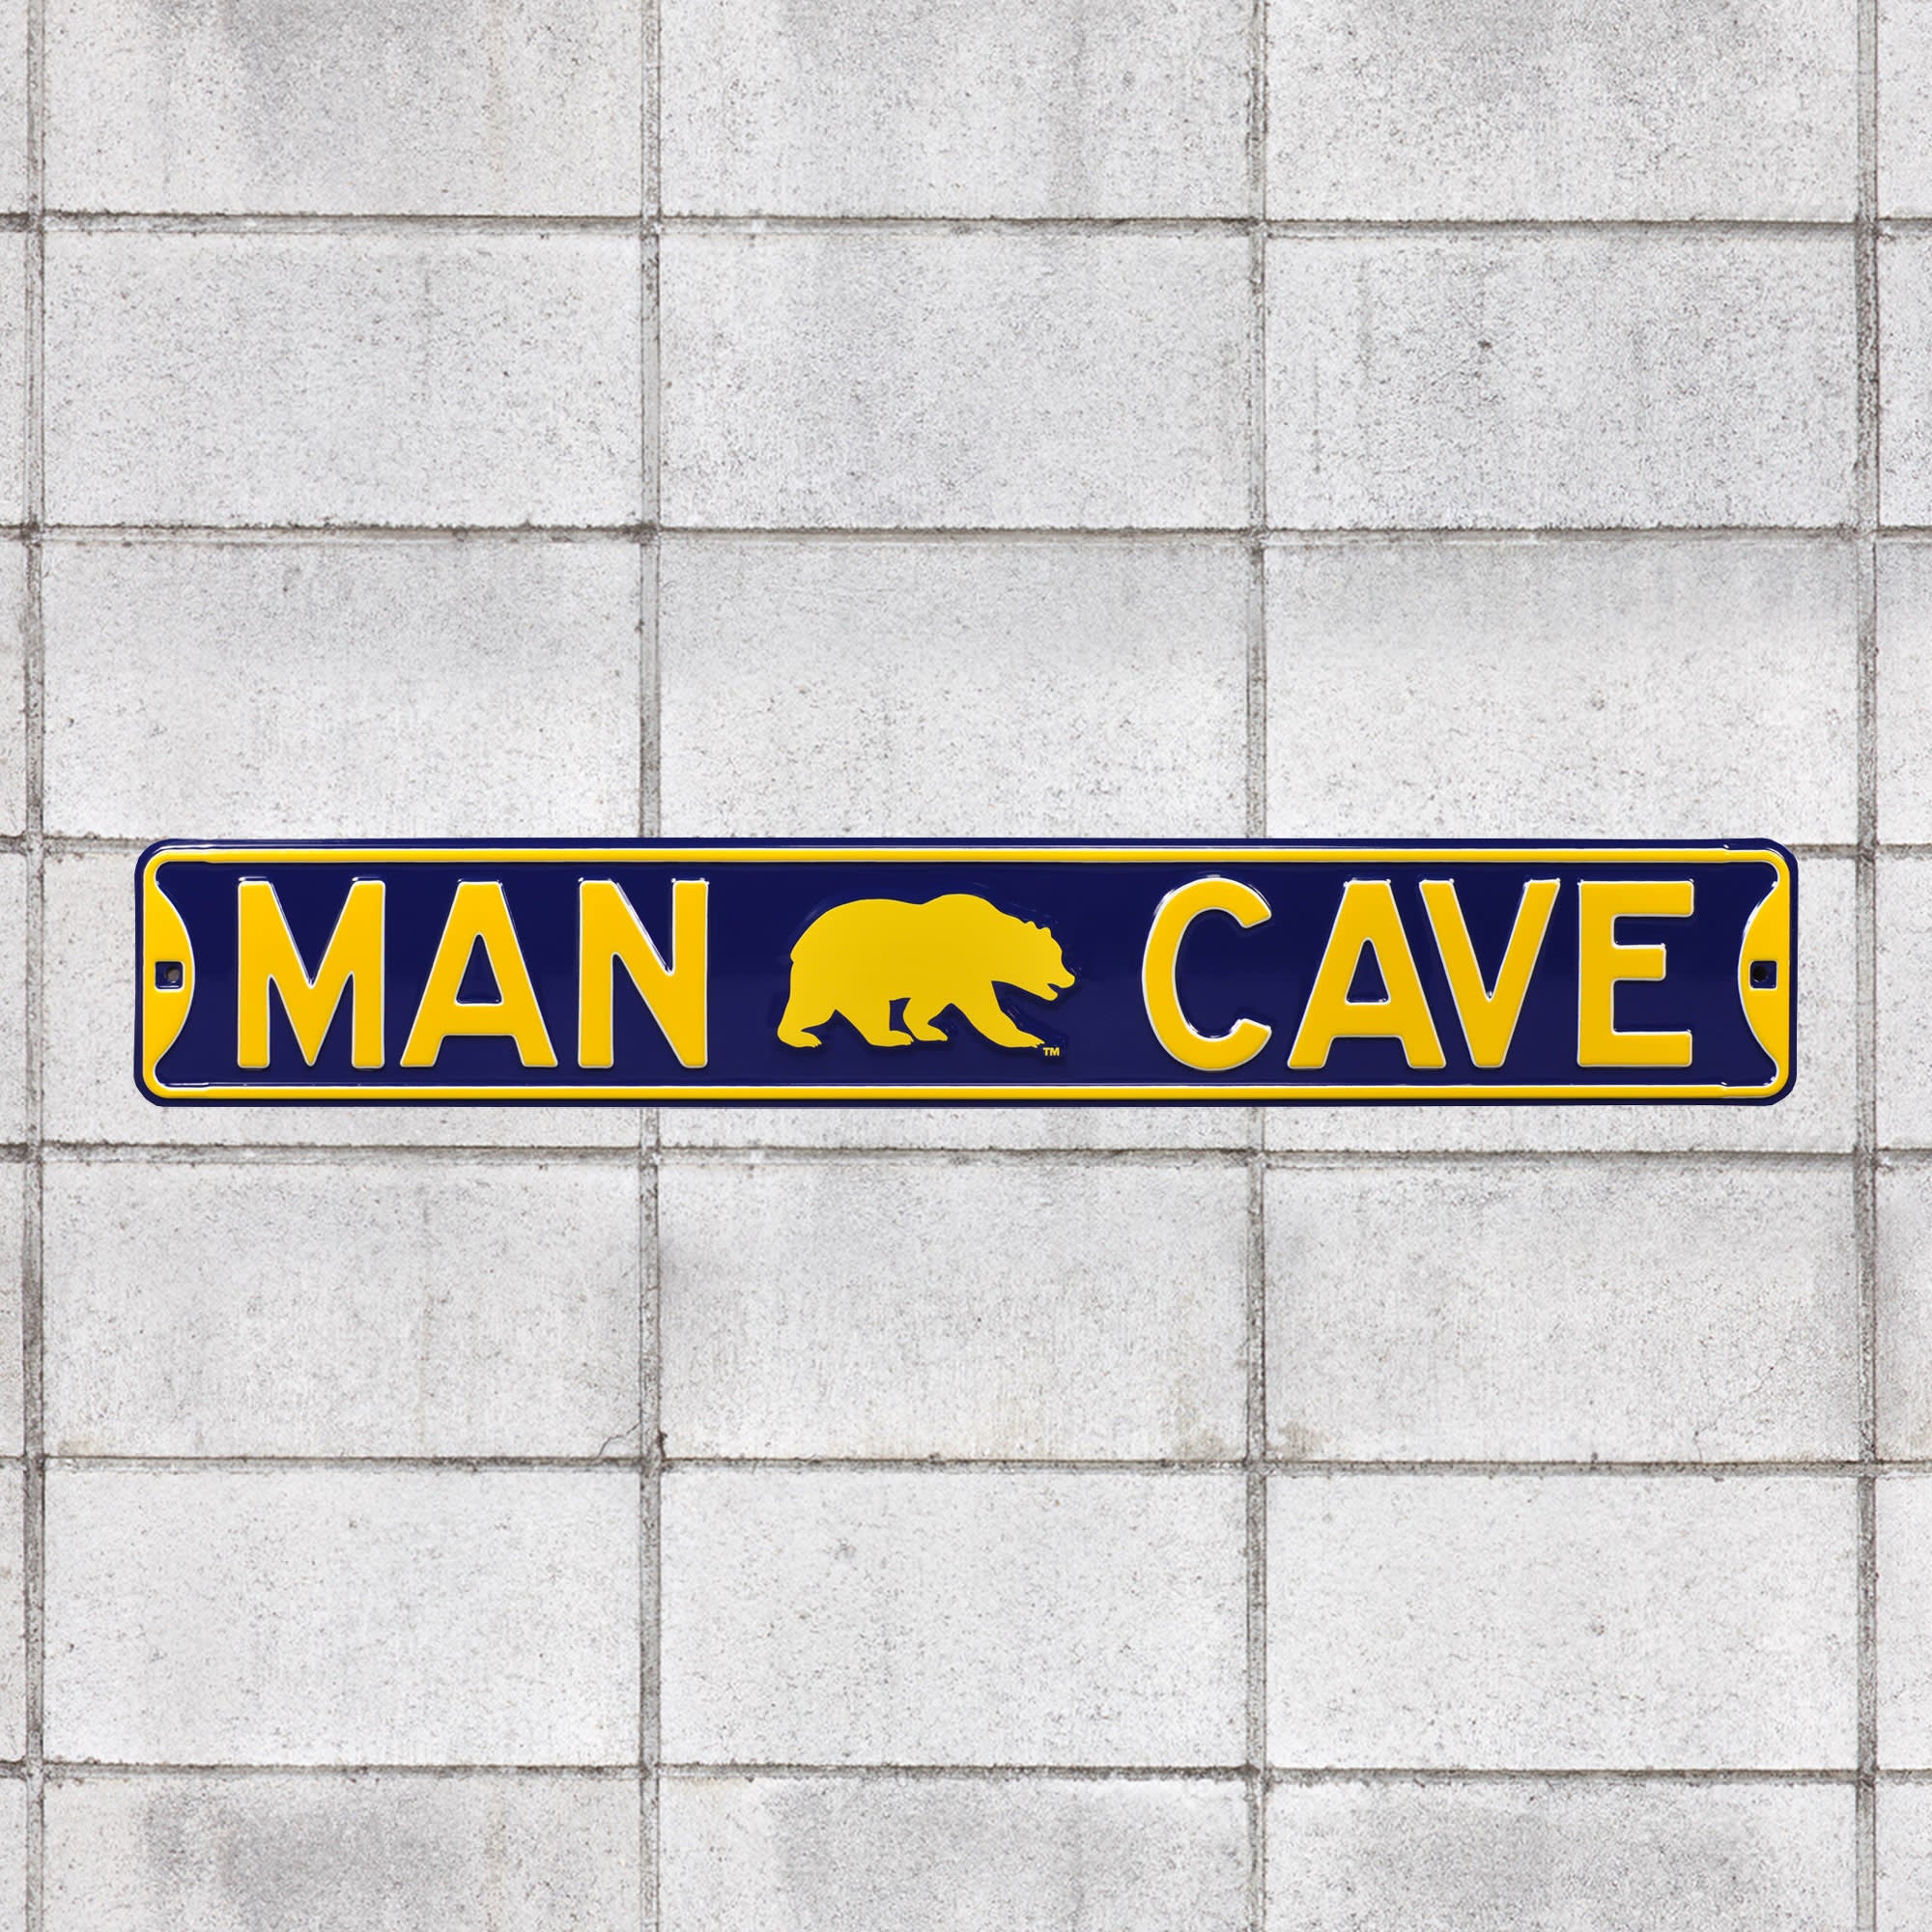 Cal State Golden Bears for California Golden Bears: Man Cave - Officially Licensed Metal Street Sign 36.0"W x 6.0"H by Fathead |